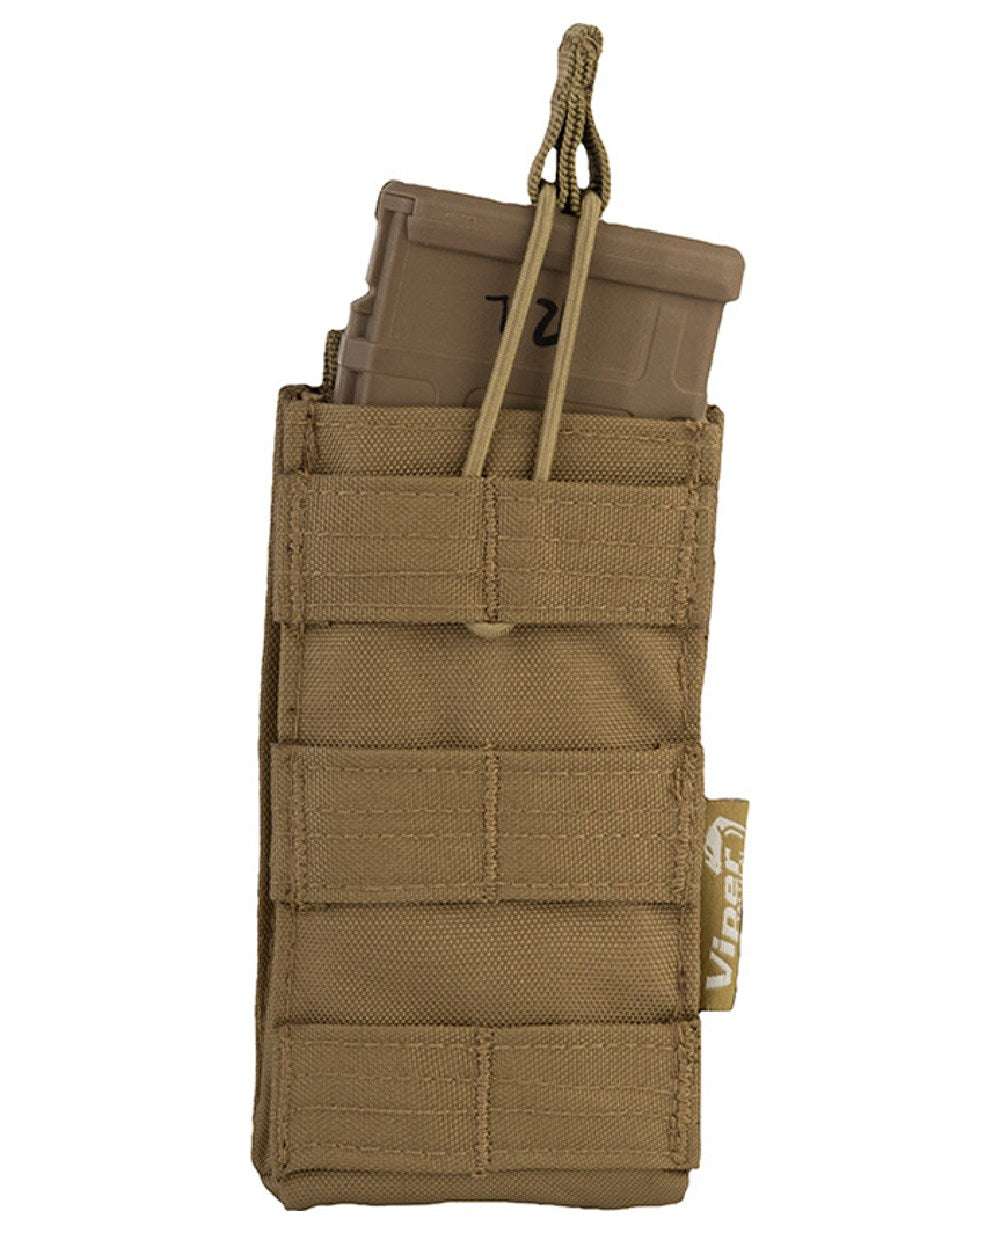 Viper Quick Release Mag Pouch in Coyote 